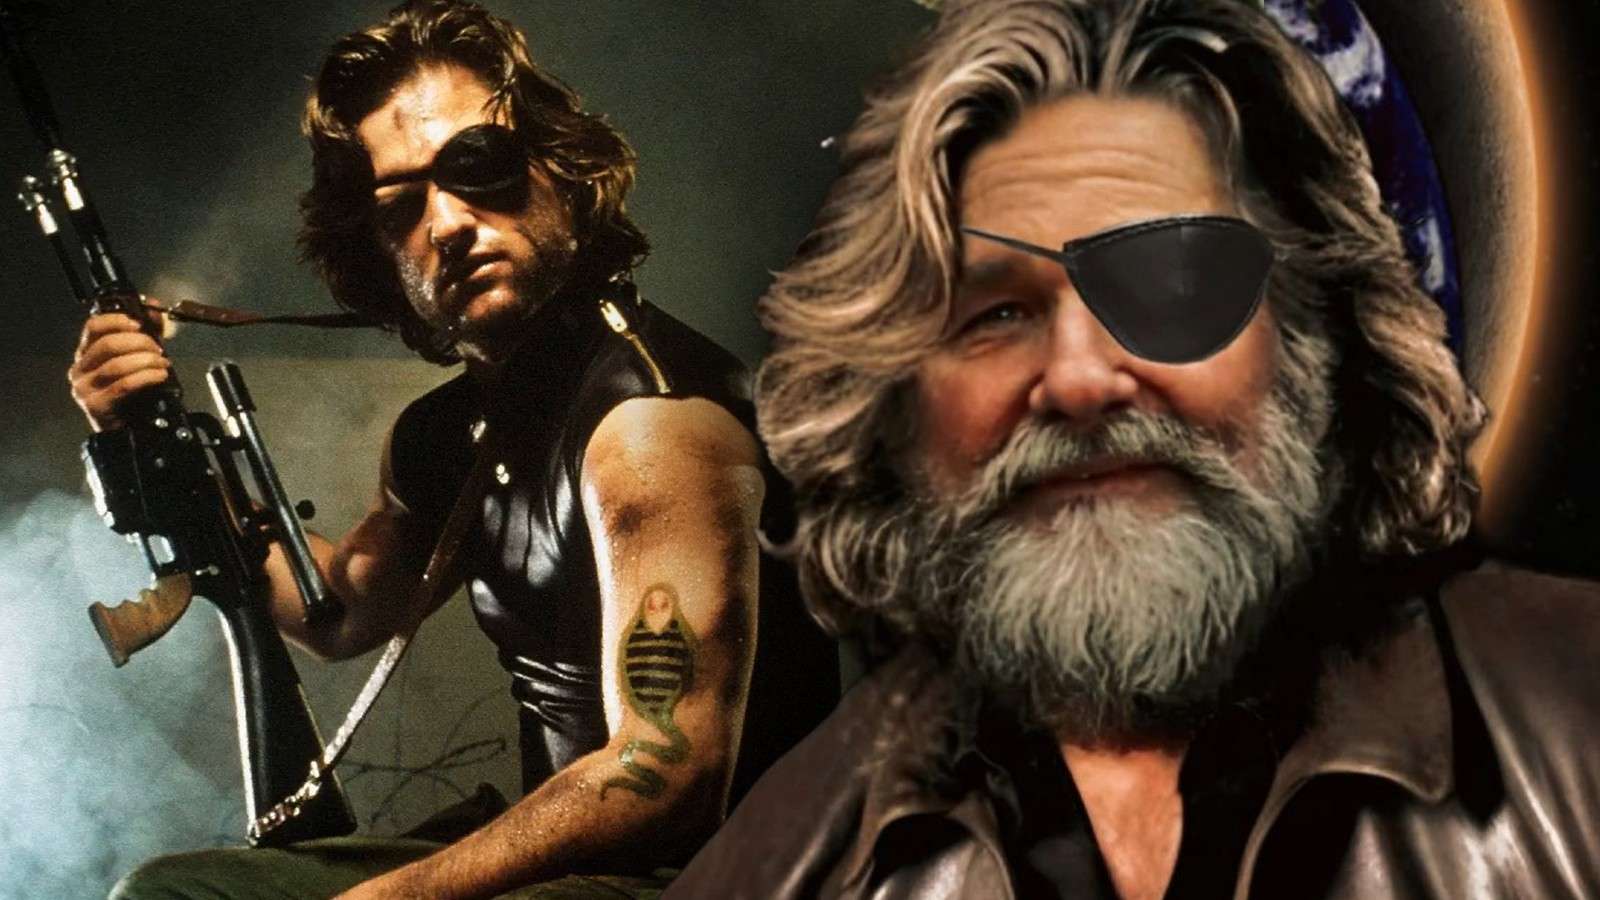 Kurt Russell as Snake Plissken and the fake poster for Escape from Earth